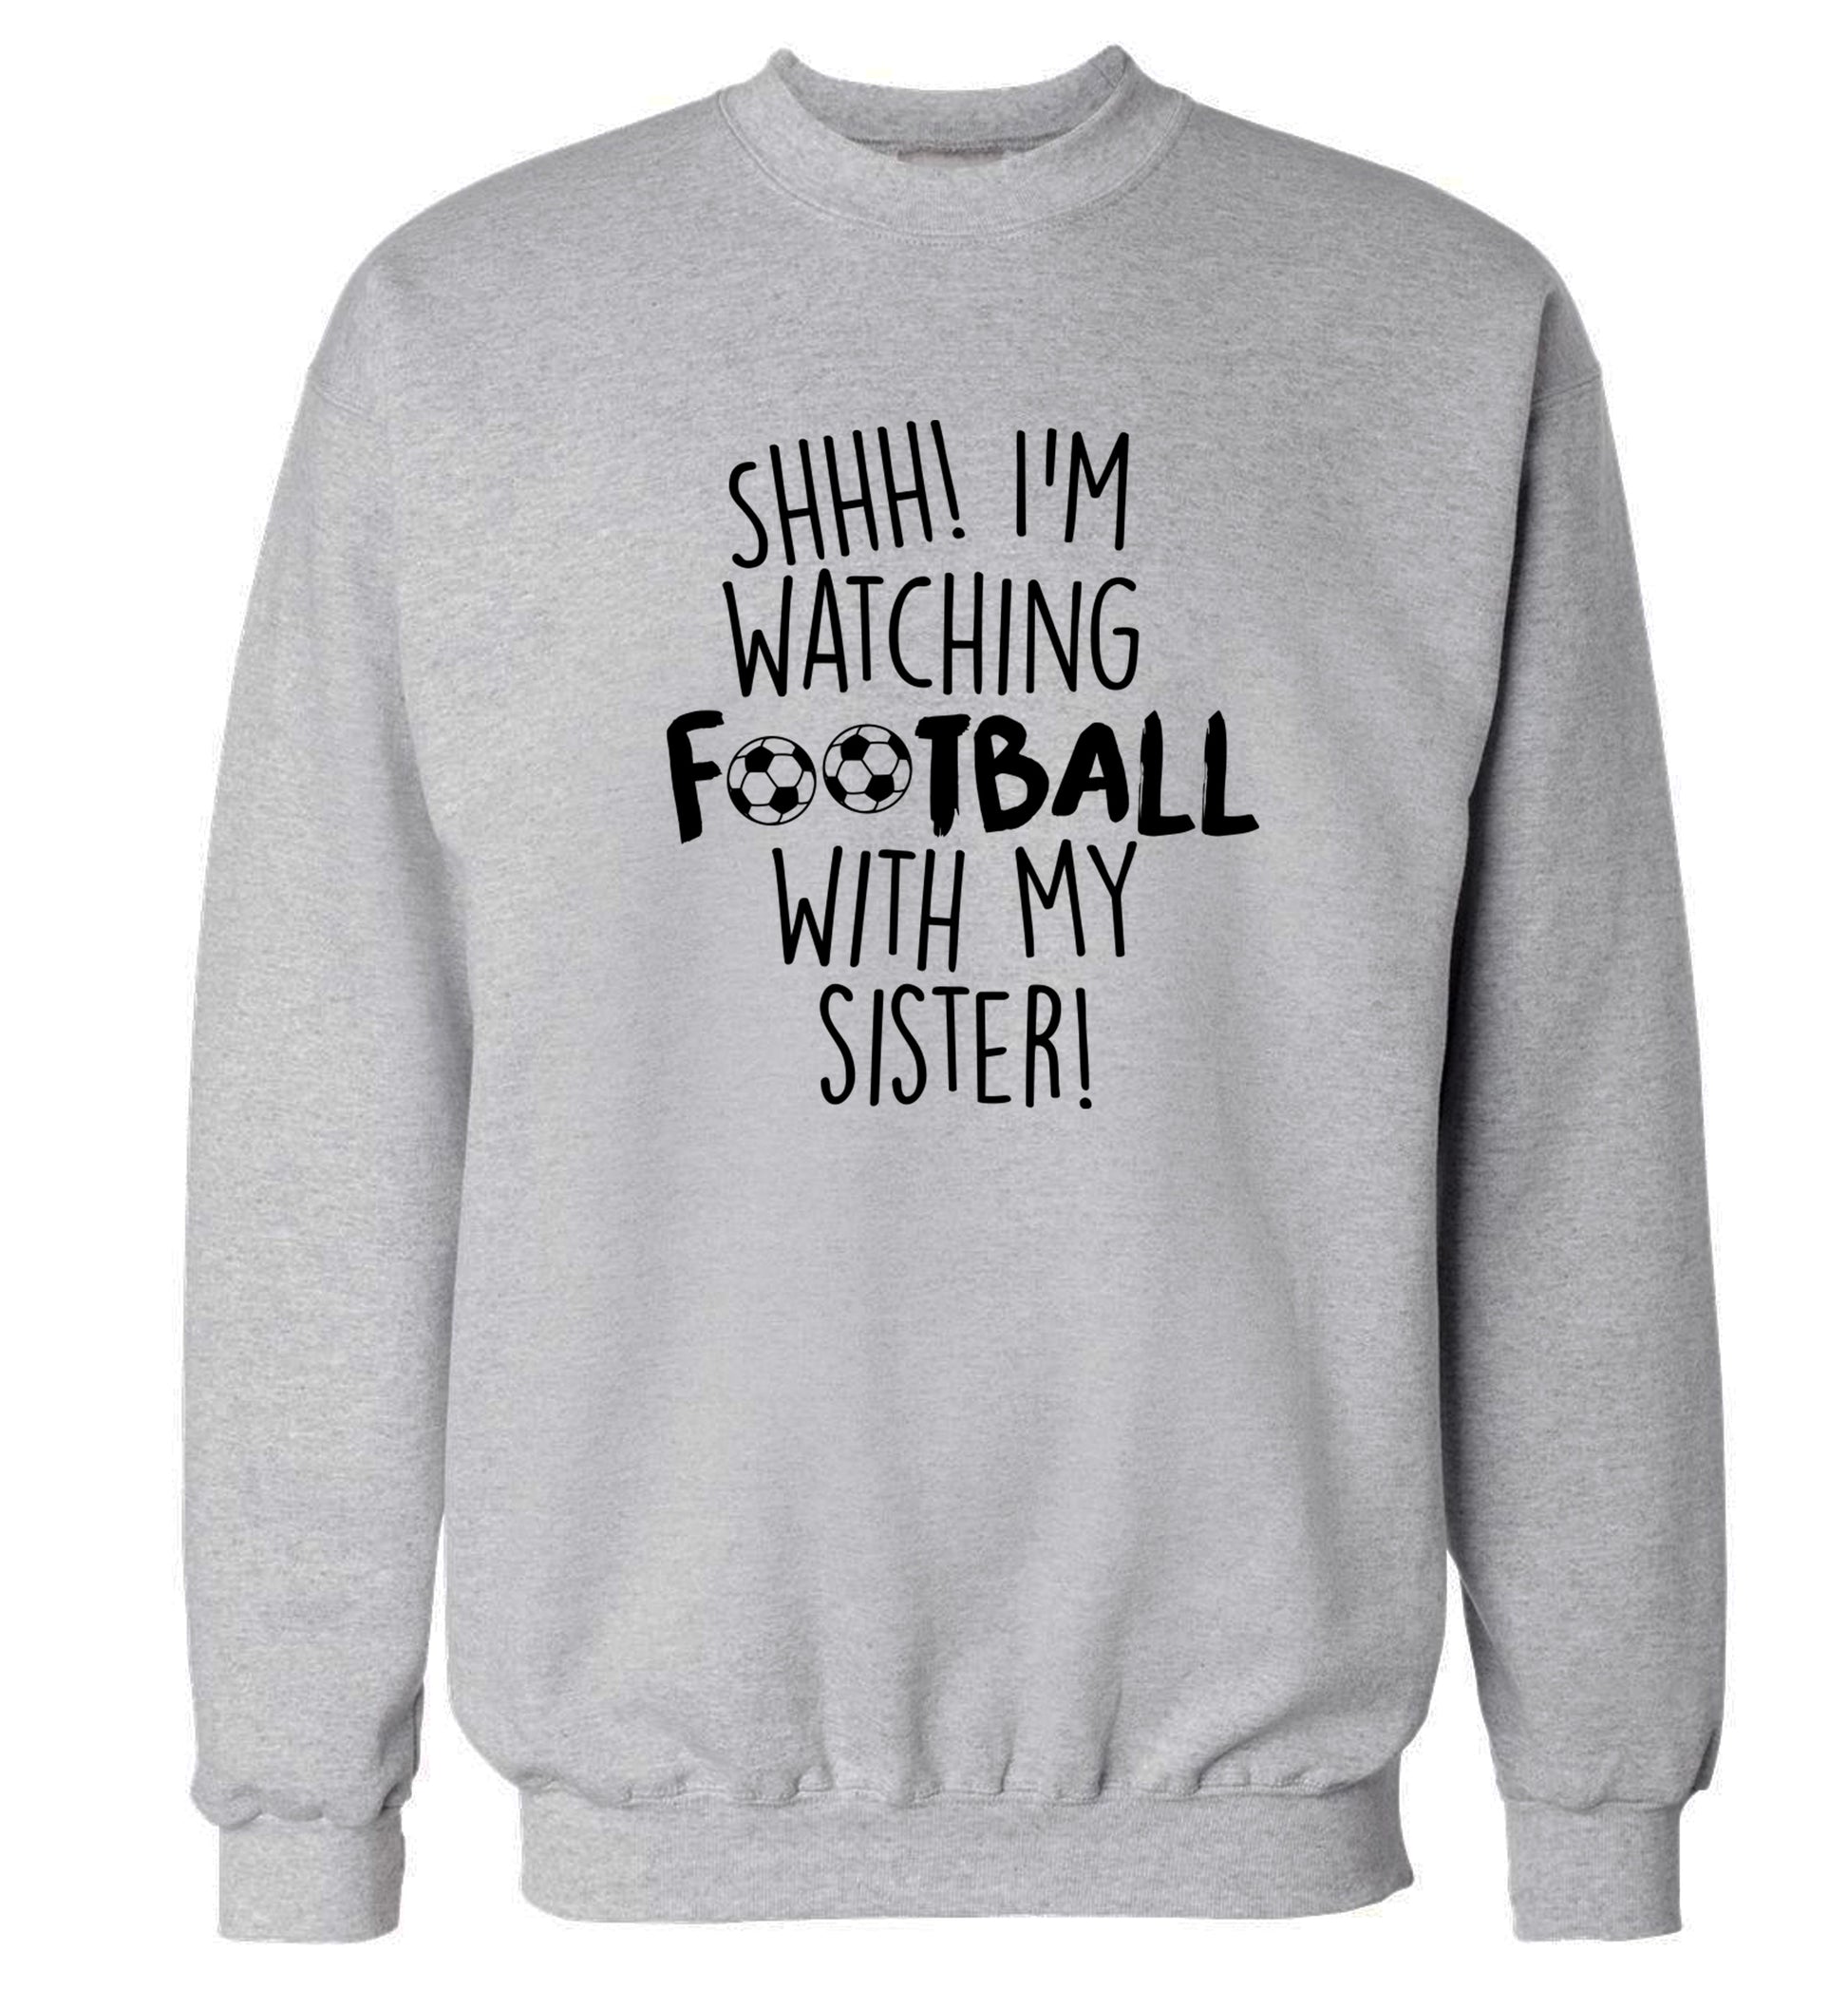 Shhh I'm watching football with my sister Adult's unisexgrey Sweater 2XL